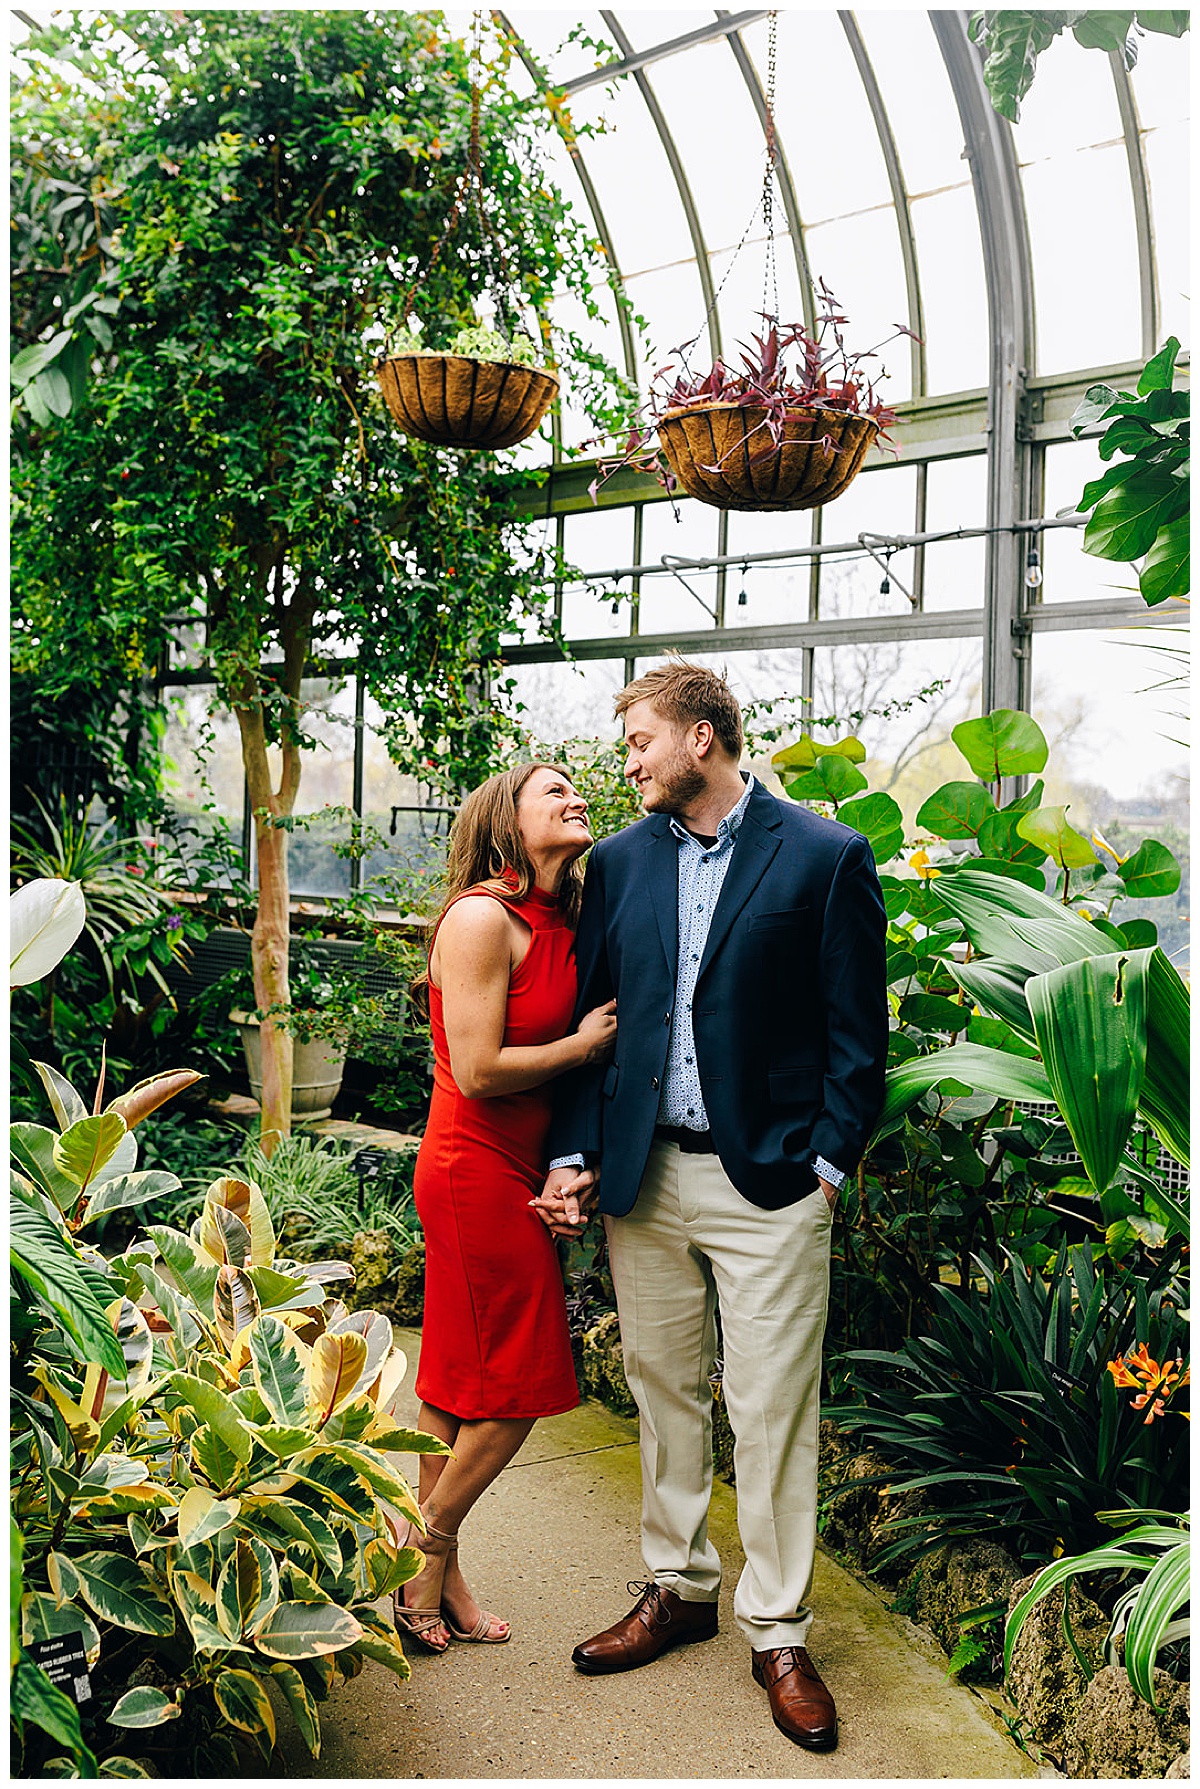 Guy looks at lady at Anna Scripps Whitcomb Conservatory